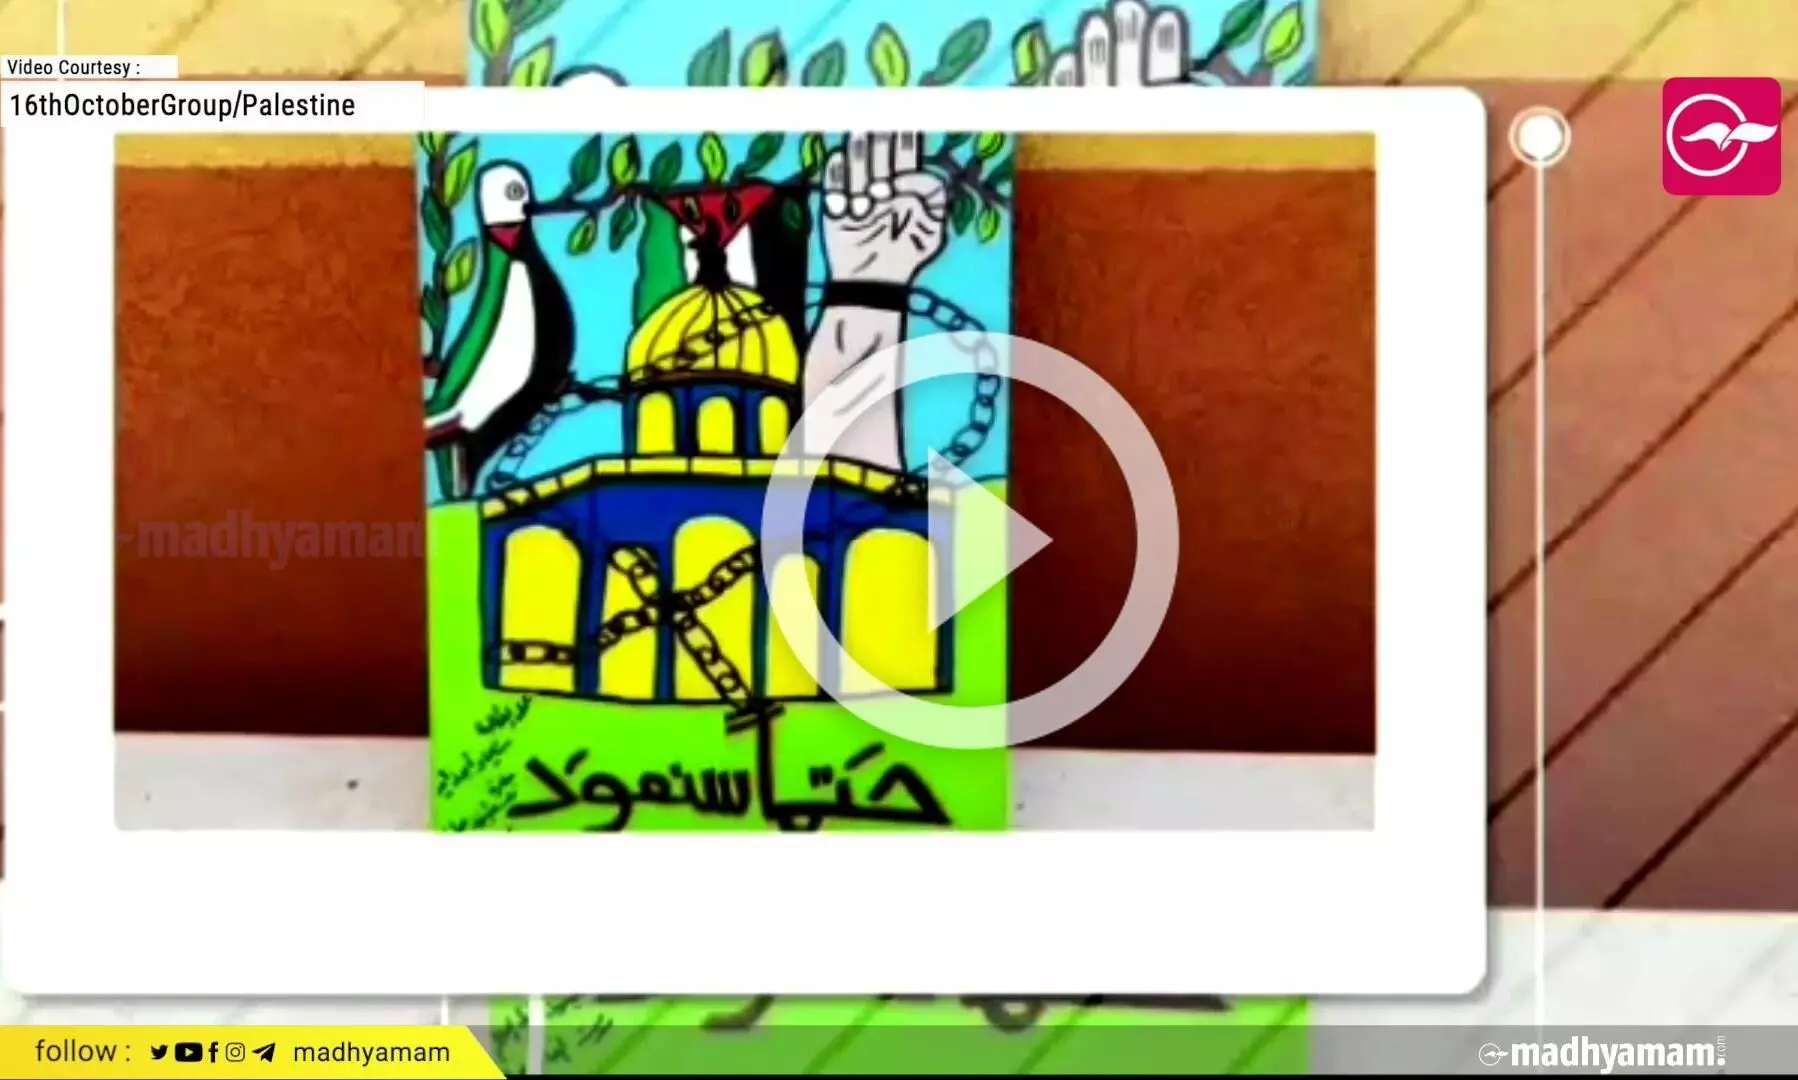 See the paintings of students from Northern Gaza Strip